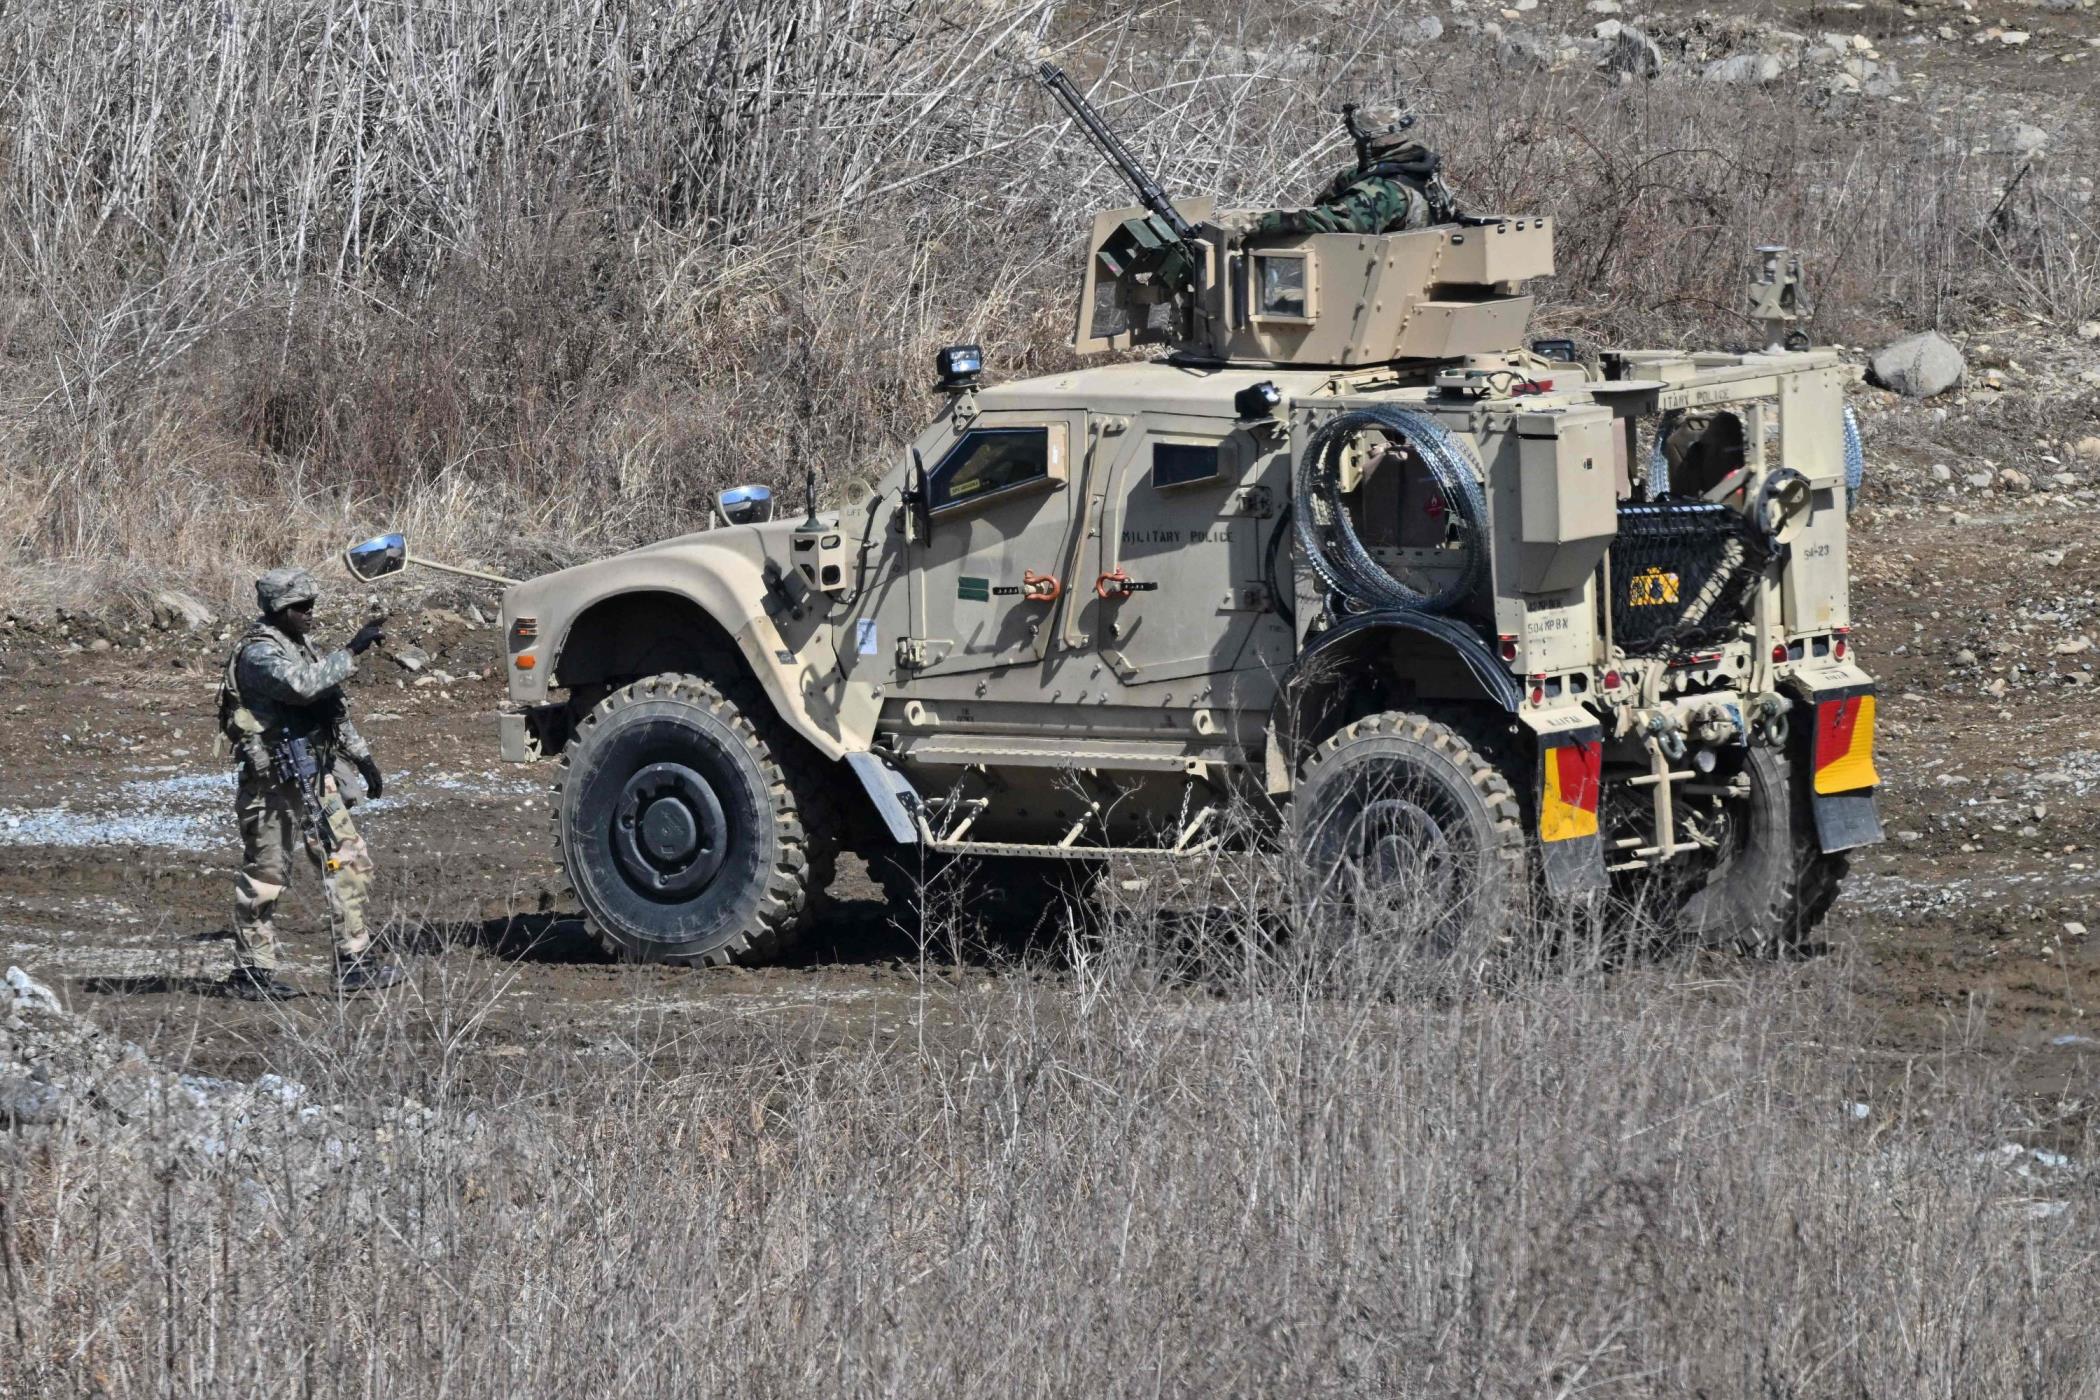 A U.S. soldier walks past a military vehicle at a military training field in the border city of Yeoncheon, South Korea, March 13, 2023. (AFP Photo)